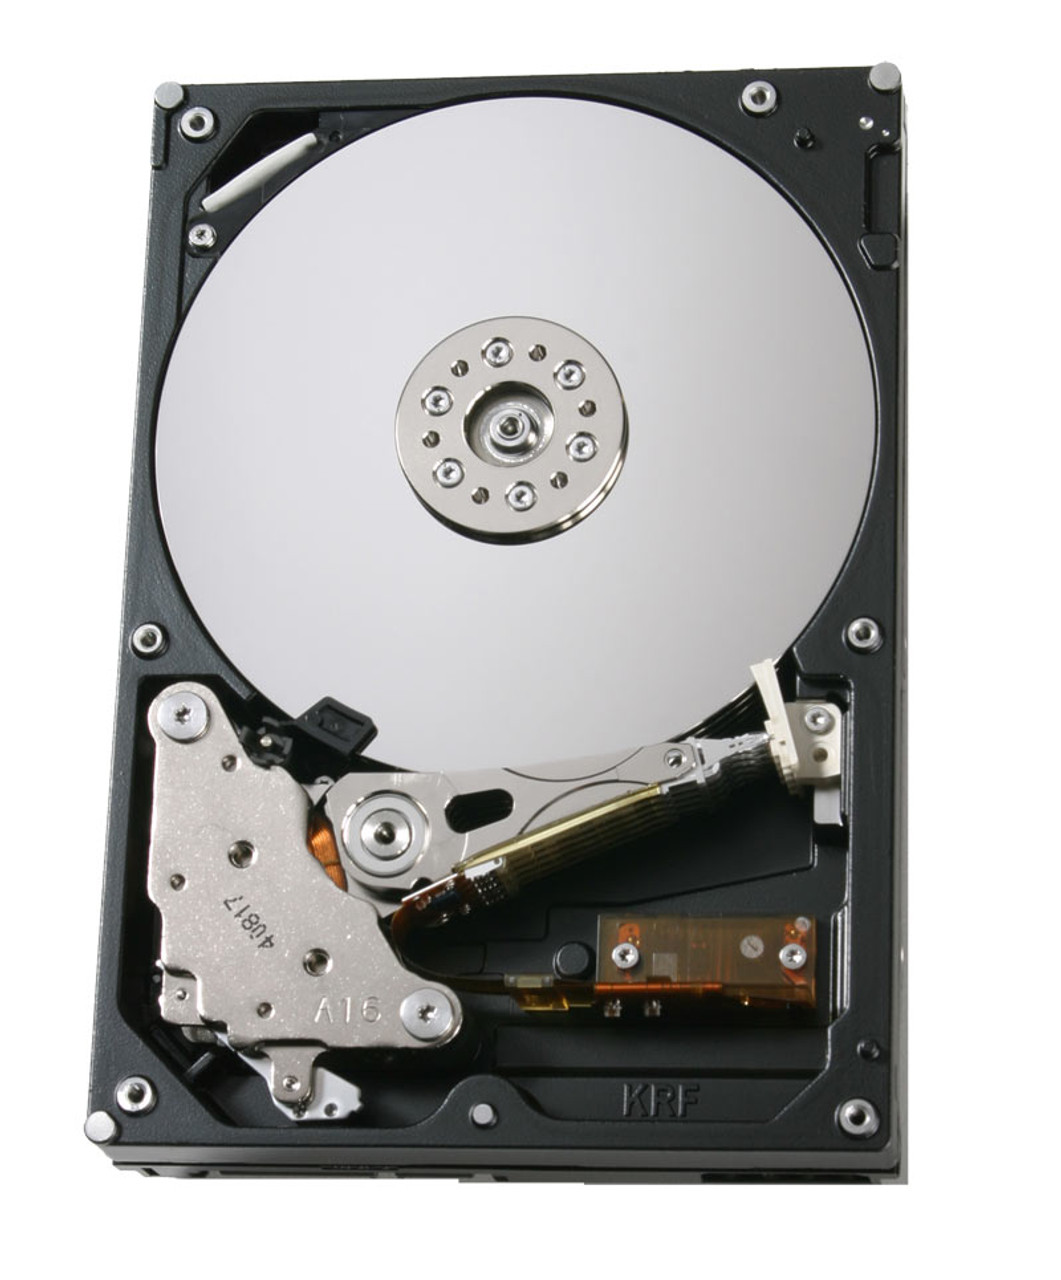 【パーツ】3.5 SATA 3TB 1台 正常 Hitachi HDS723030ALA640 使用時間71187H ■HDD1484